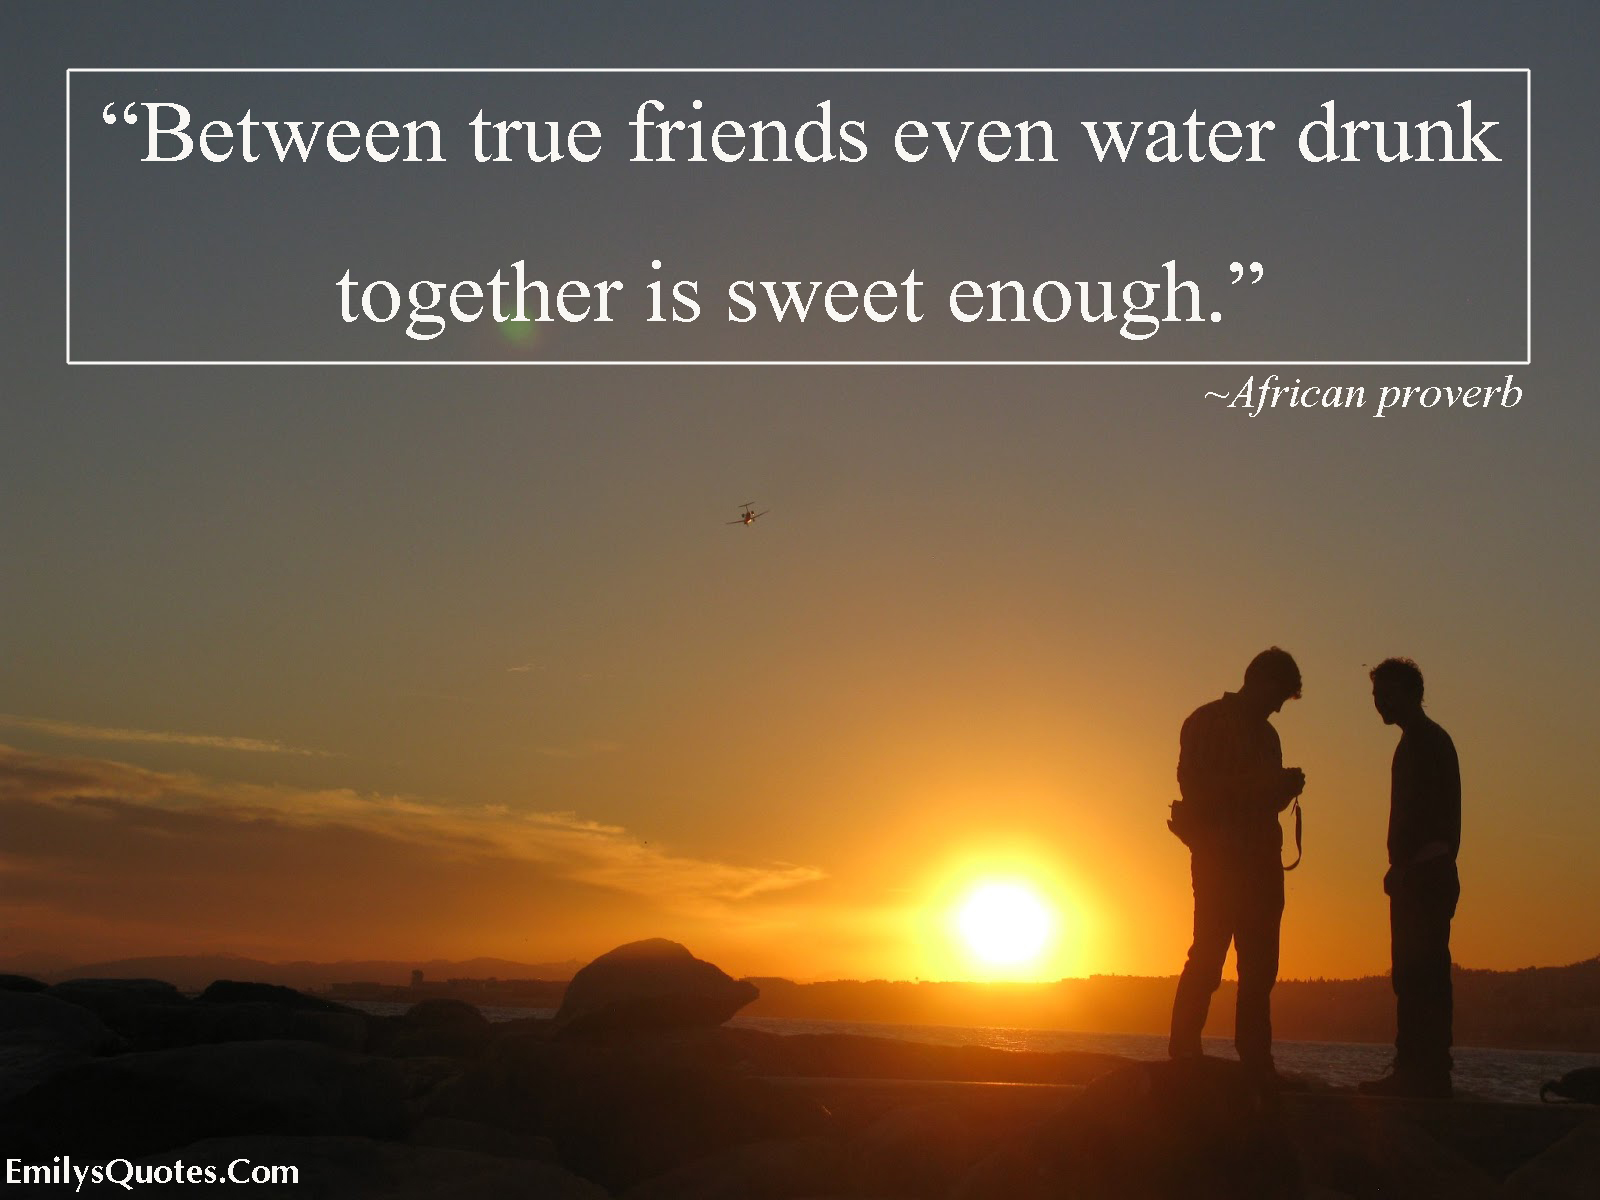 Between true friends even water drunk together is sweet enough